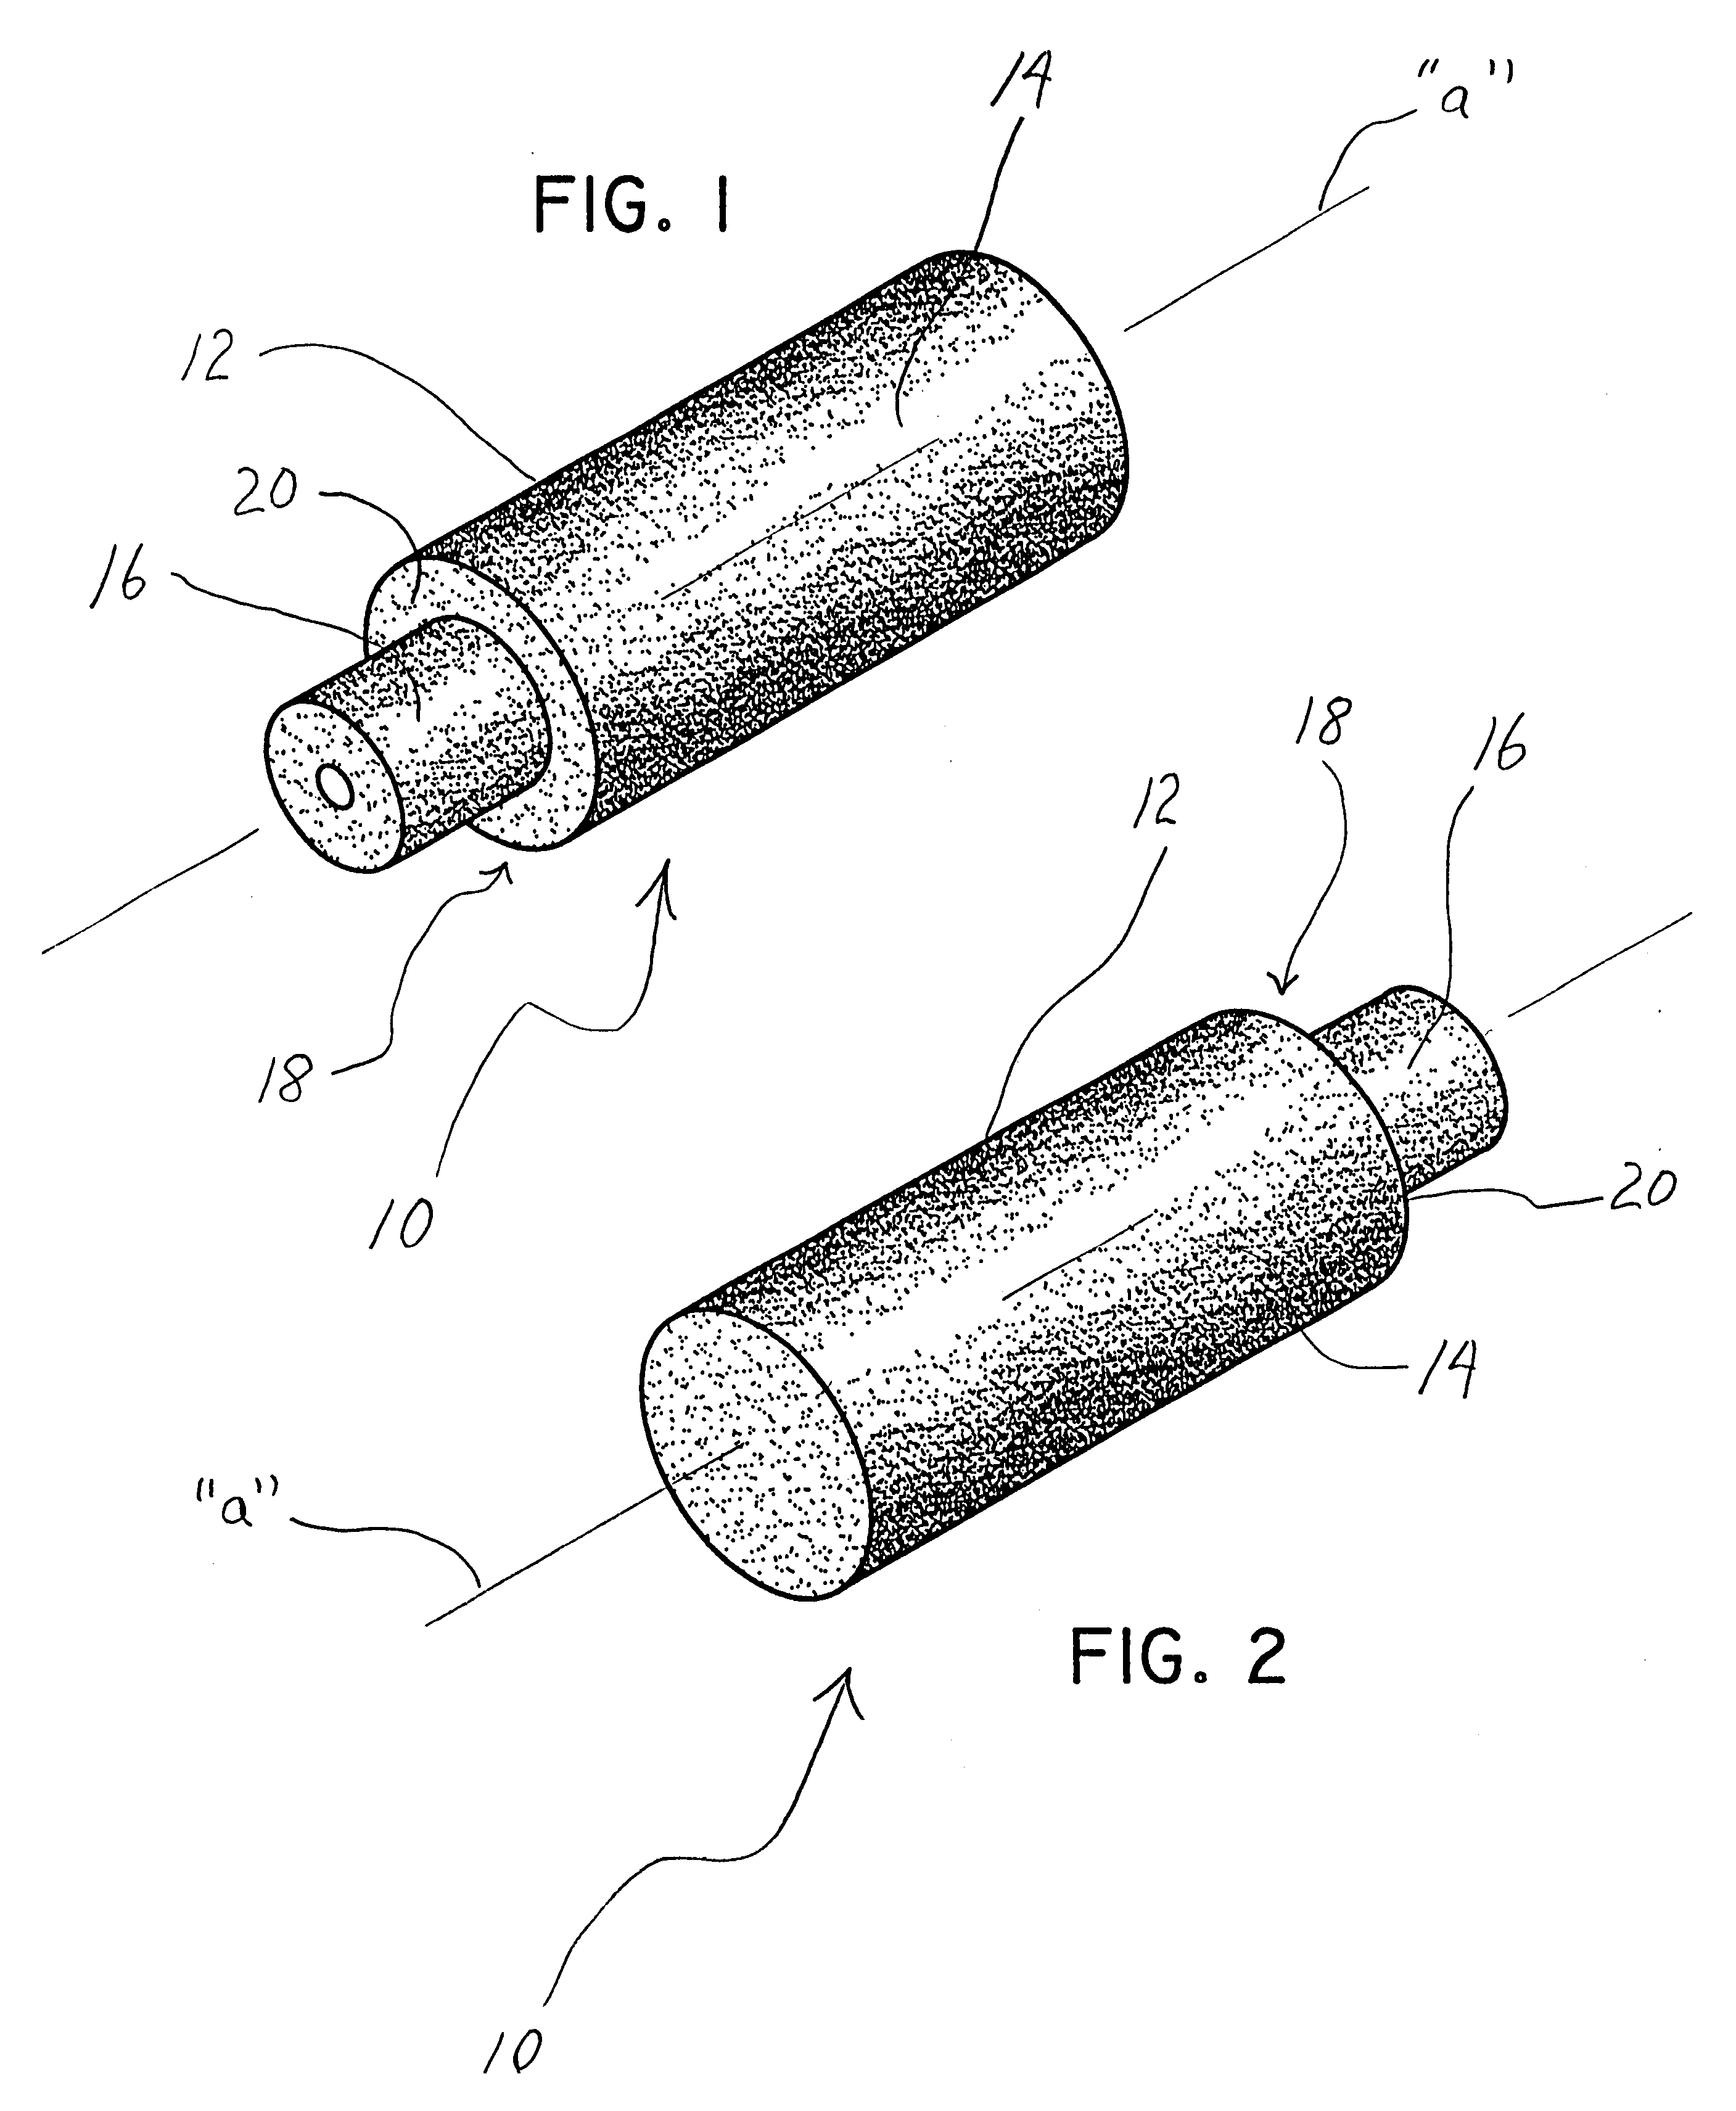 Fusion implant device and method of use